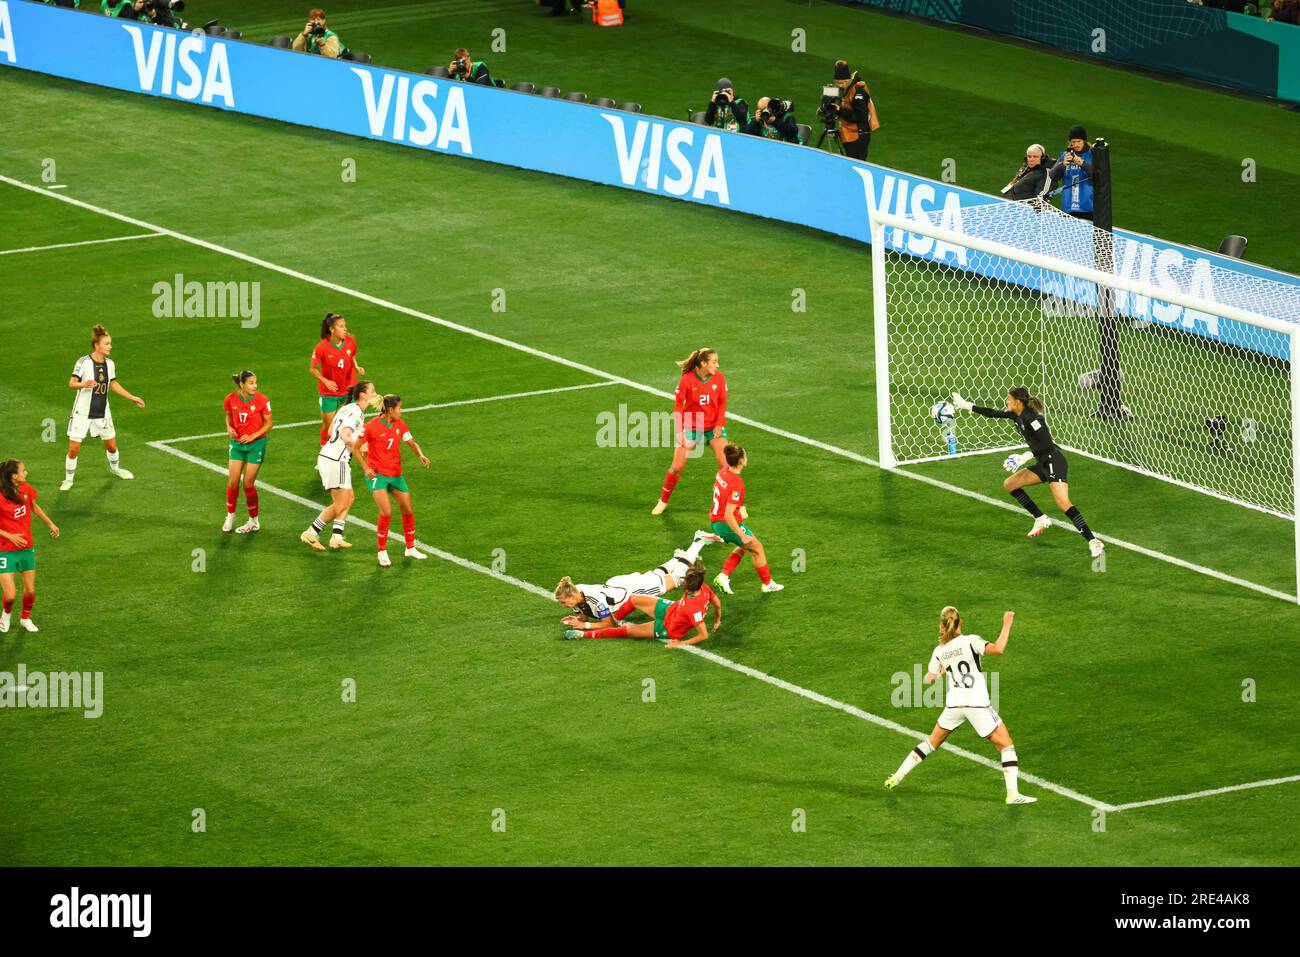 Goalkeeper Khadija Er-Rmichi of Morocco in action during the FIFA Women's World Cup Australia & New Zealand 2023 Group match between Germany and Morocco at Melbourne Rectangular Stadium. Germany won the game 6-0. Stock Photo